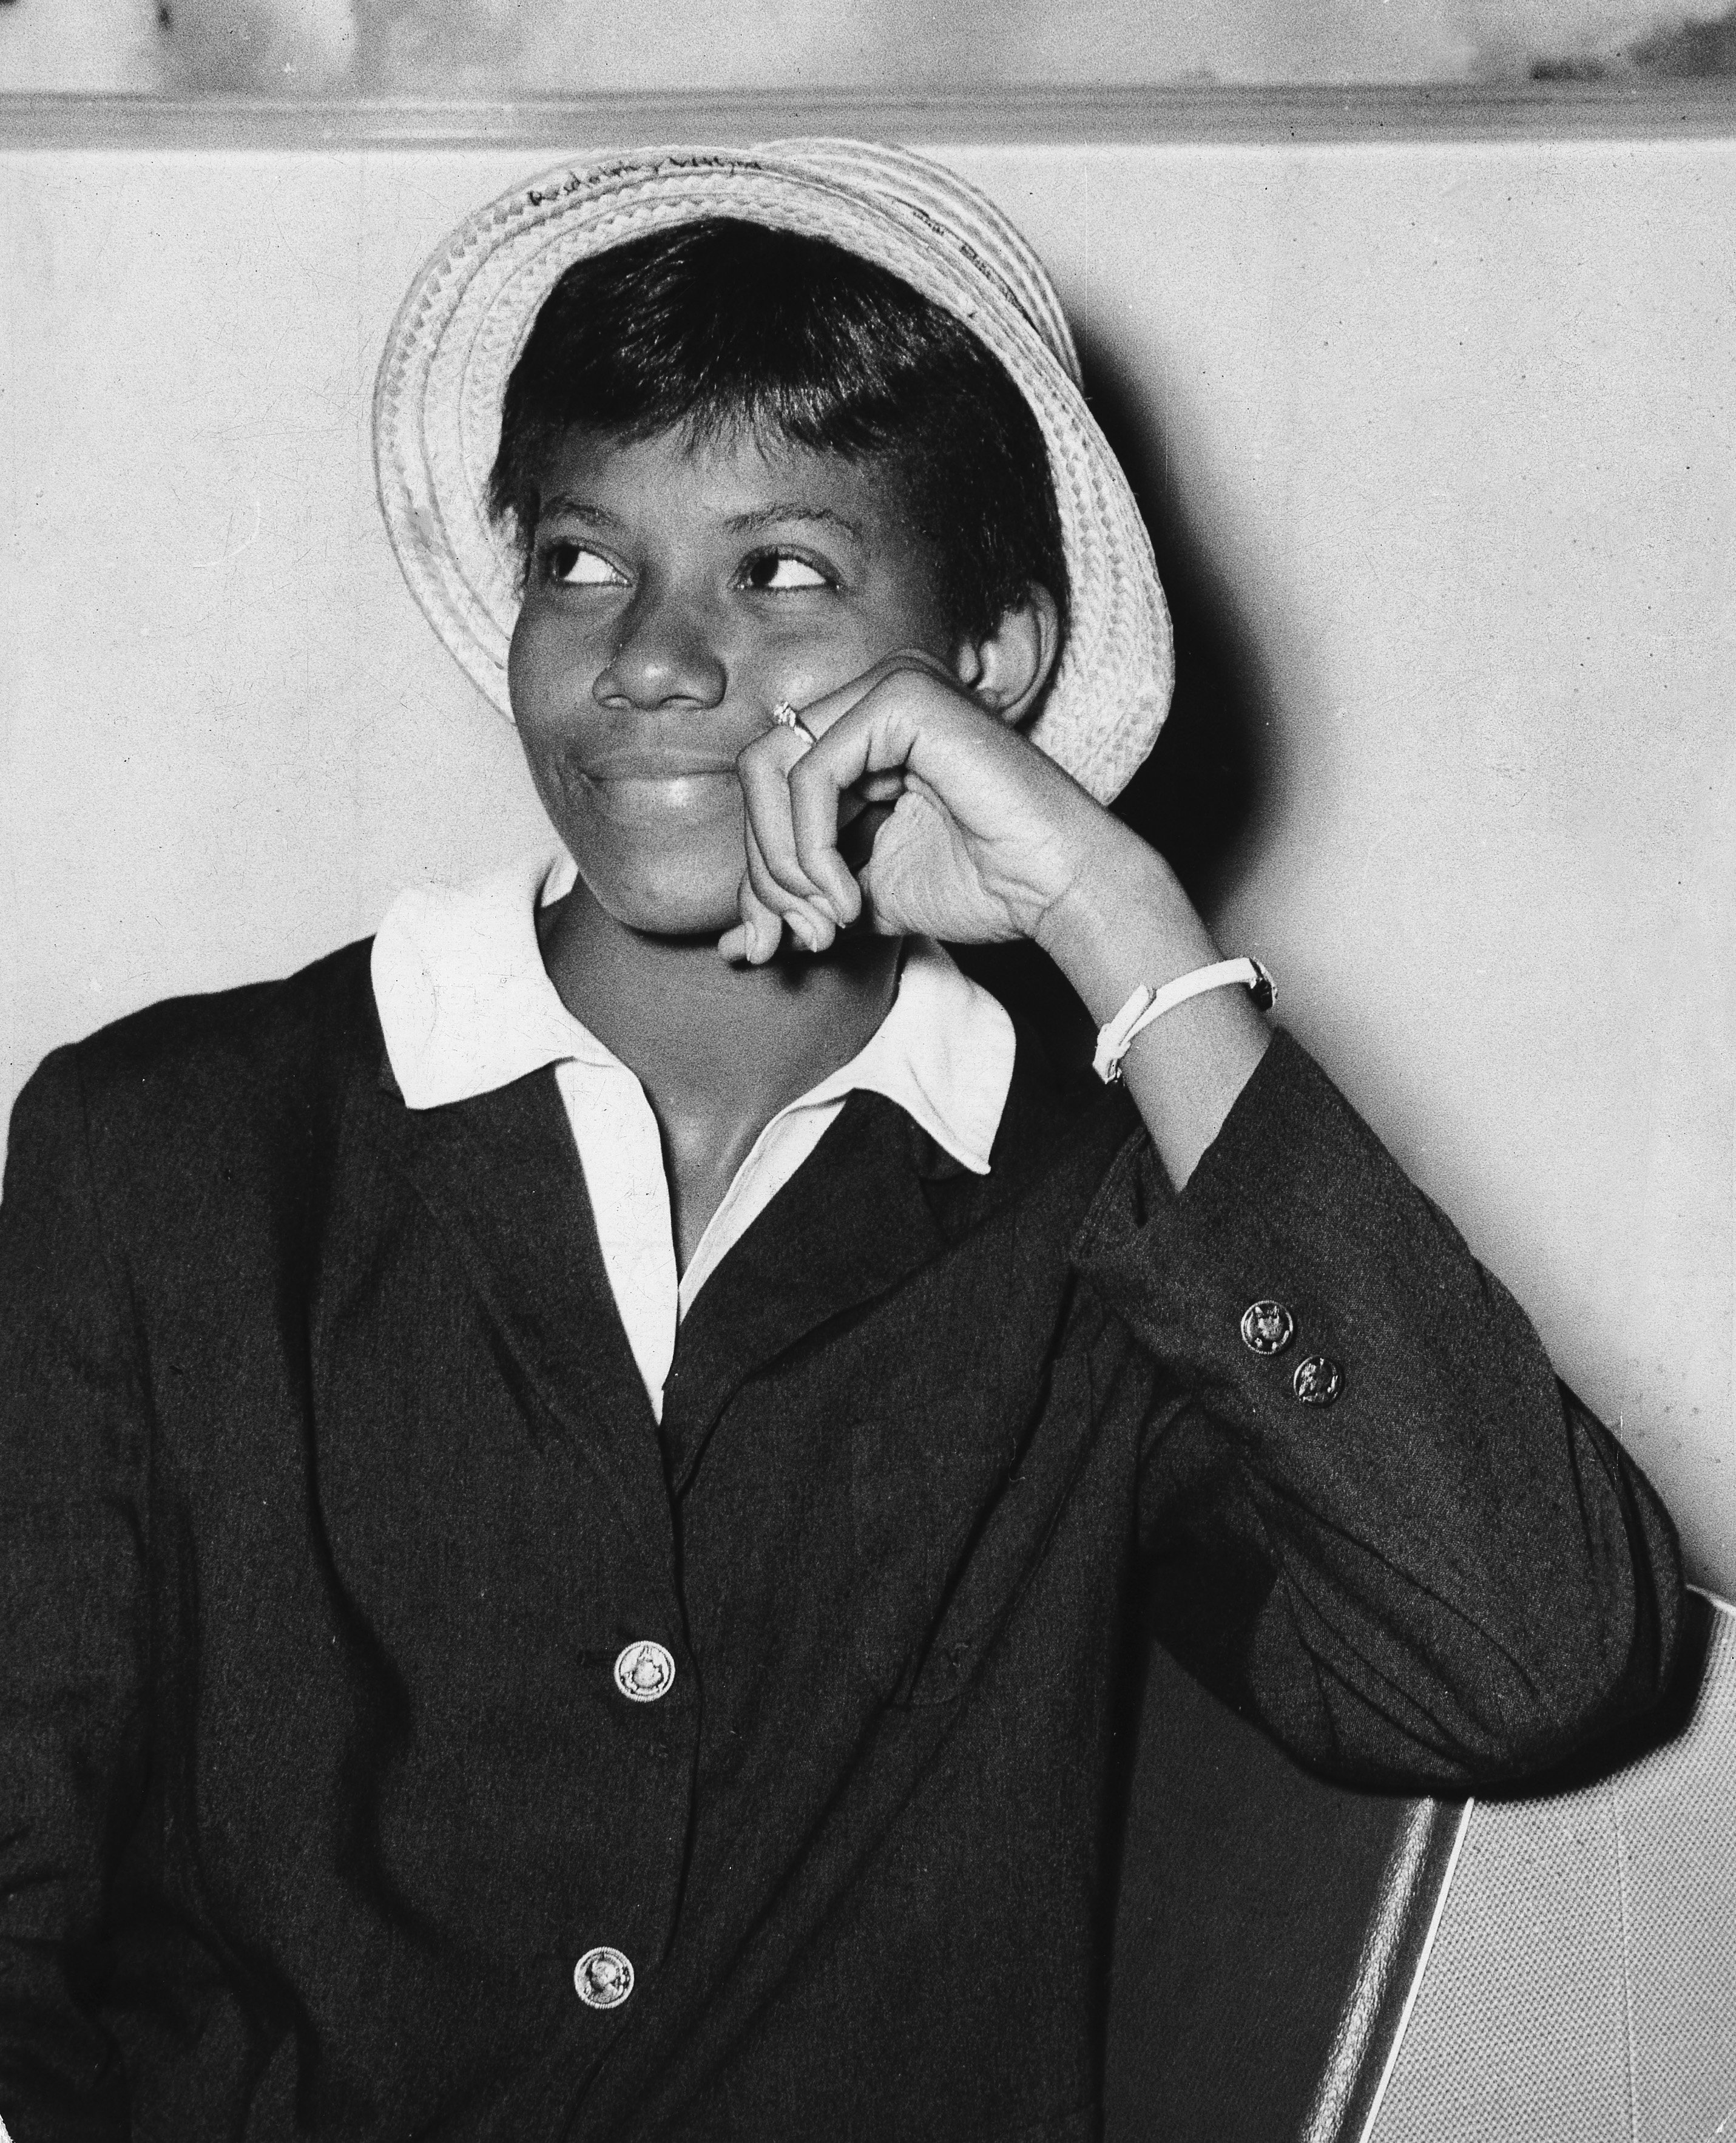 Portrait of Olympic champion Wilma Rudolph during the Summer Olympics in Rome 1960 | Photo: Getty Images